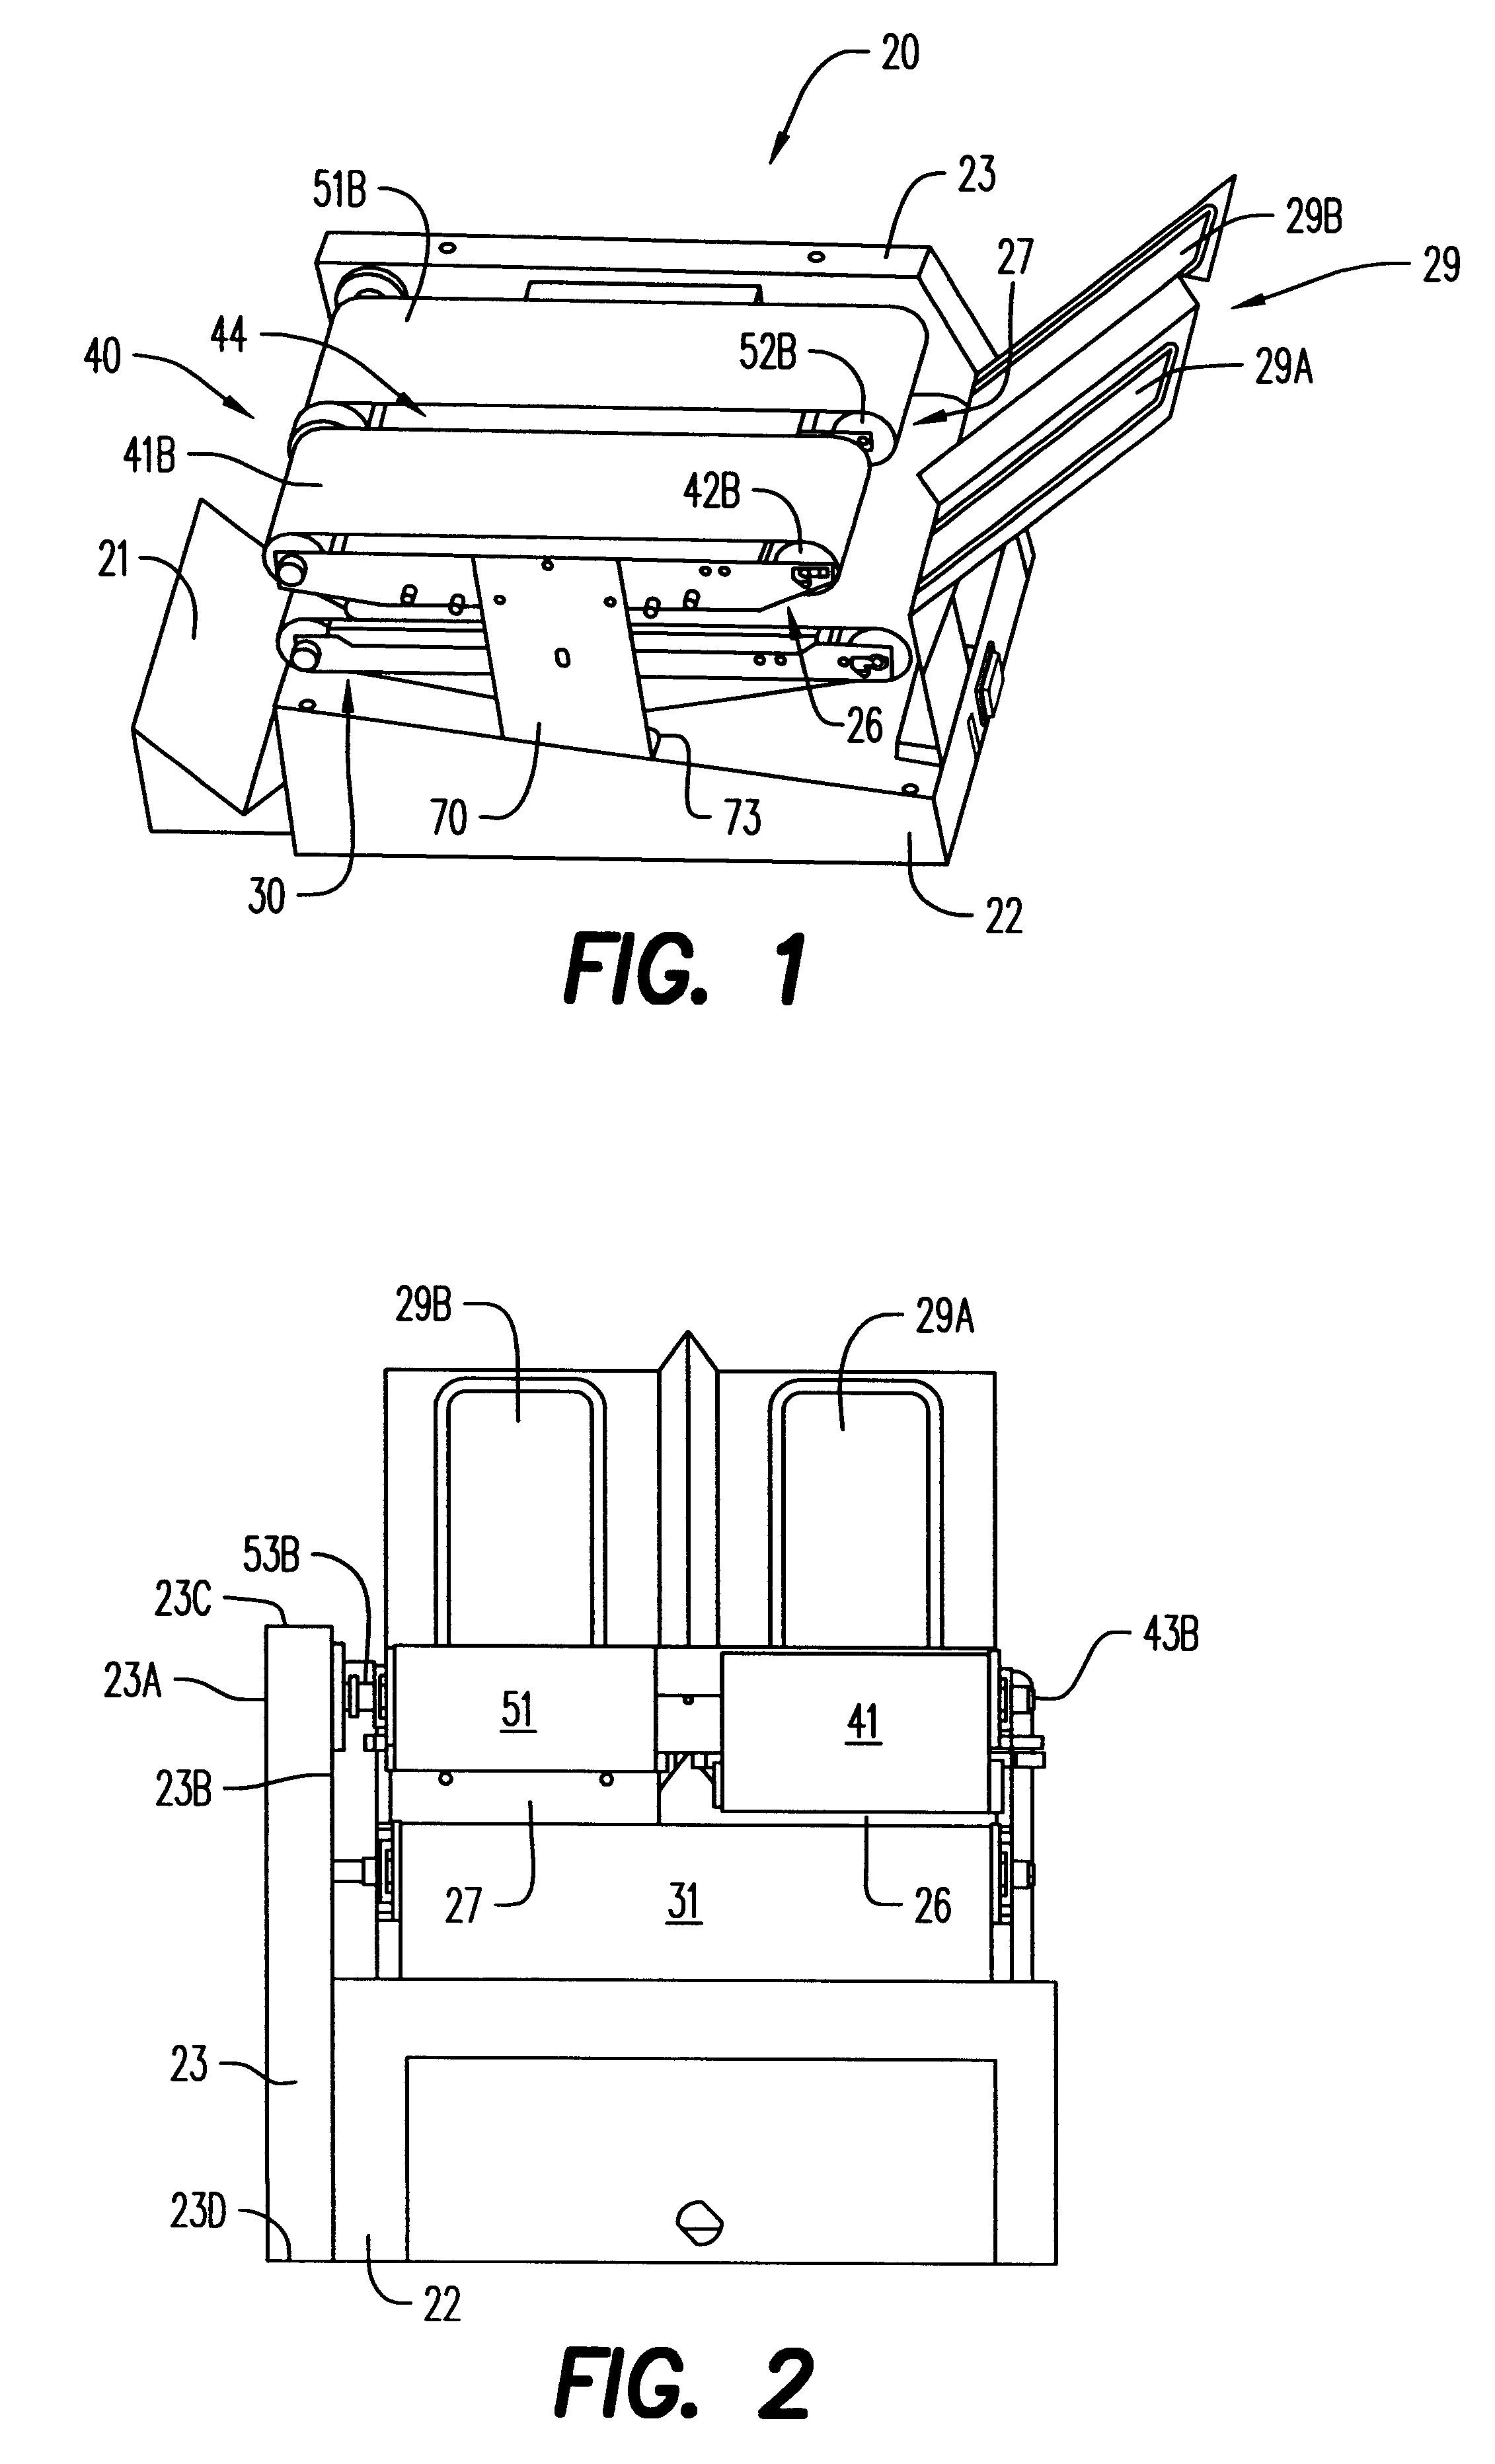 Food cooking apparatus with removable conveyor assembly and serpentine heater providing non-uniform heating